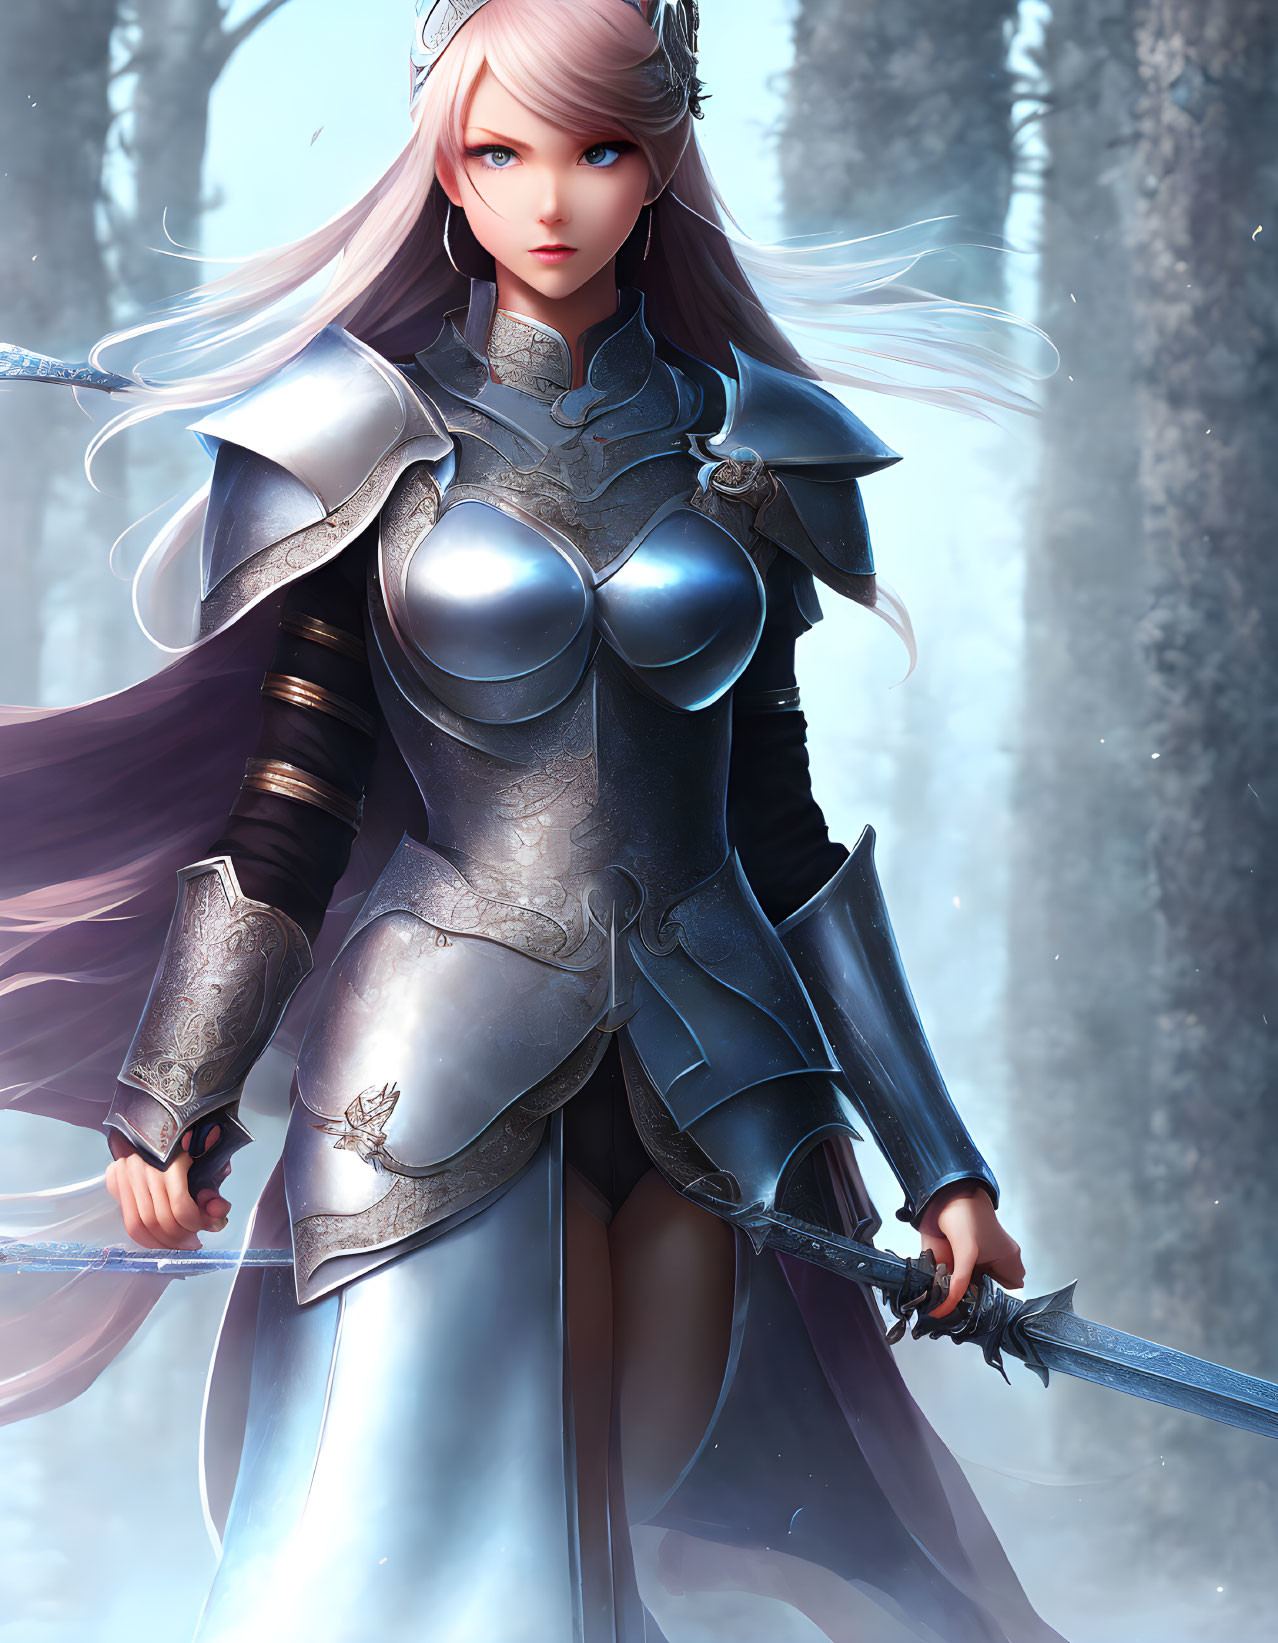 Female warrior in silver armor with sword in misty snowy forest